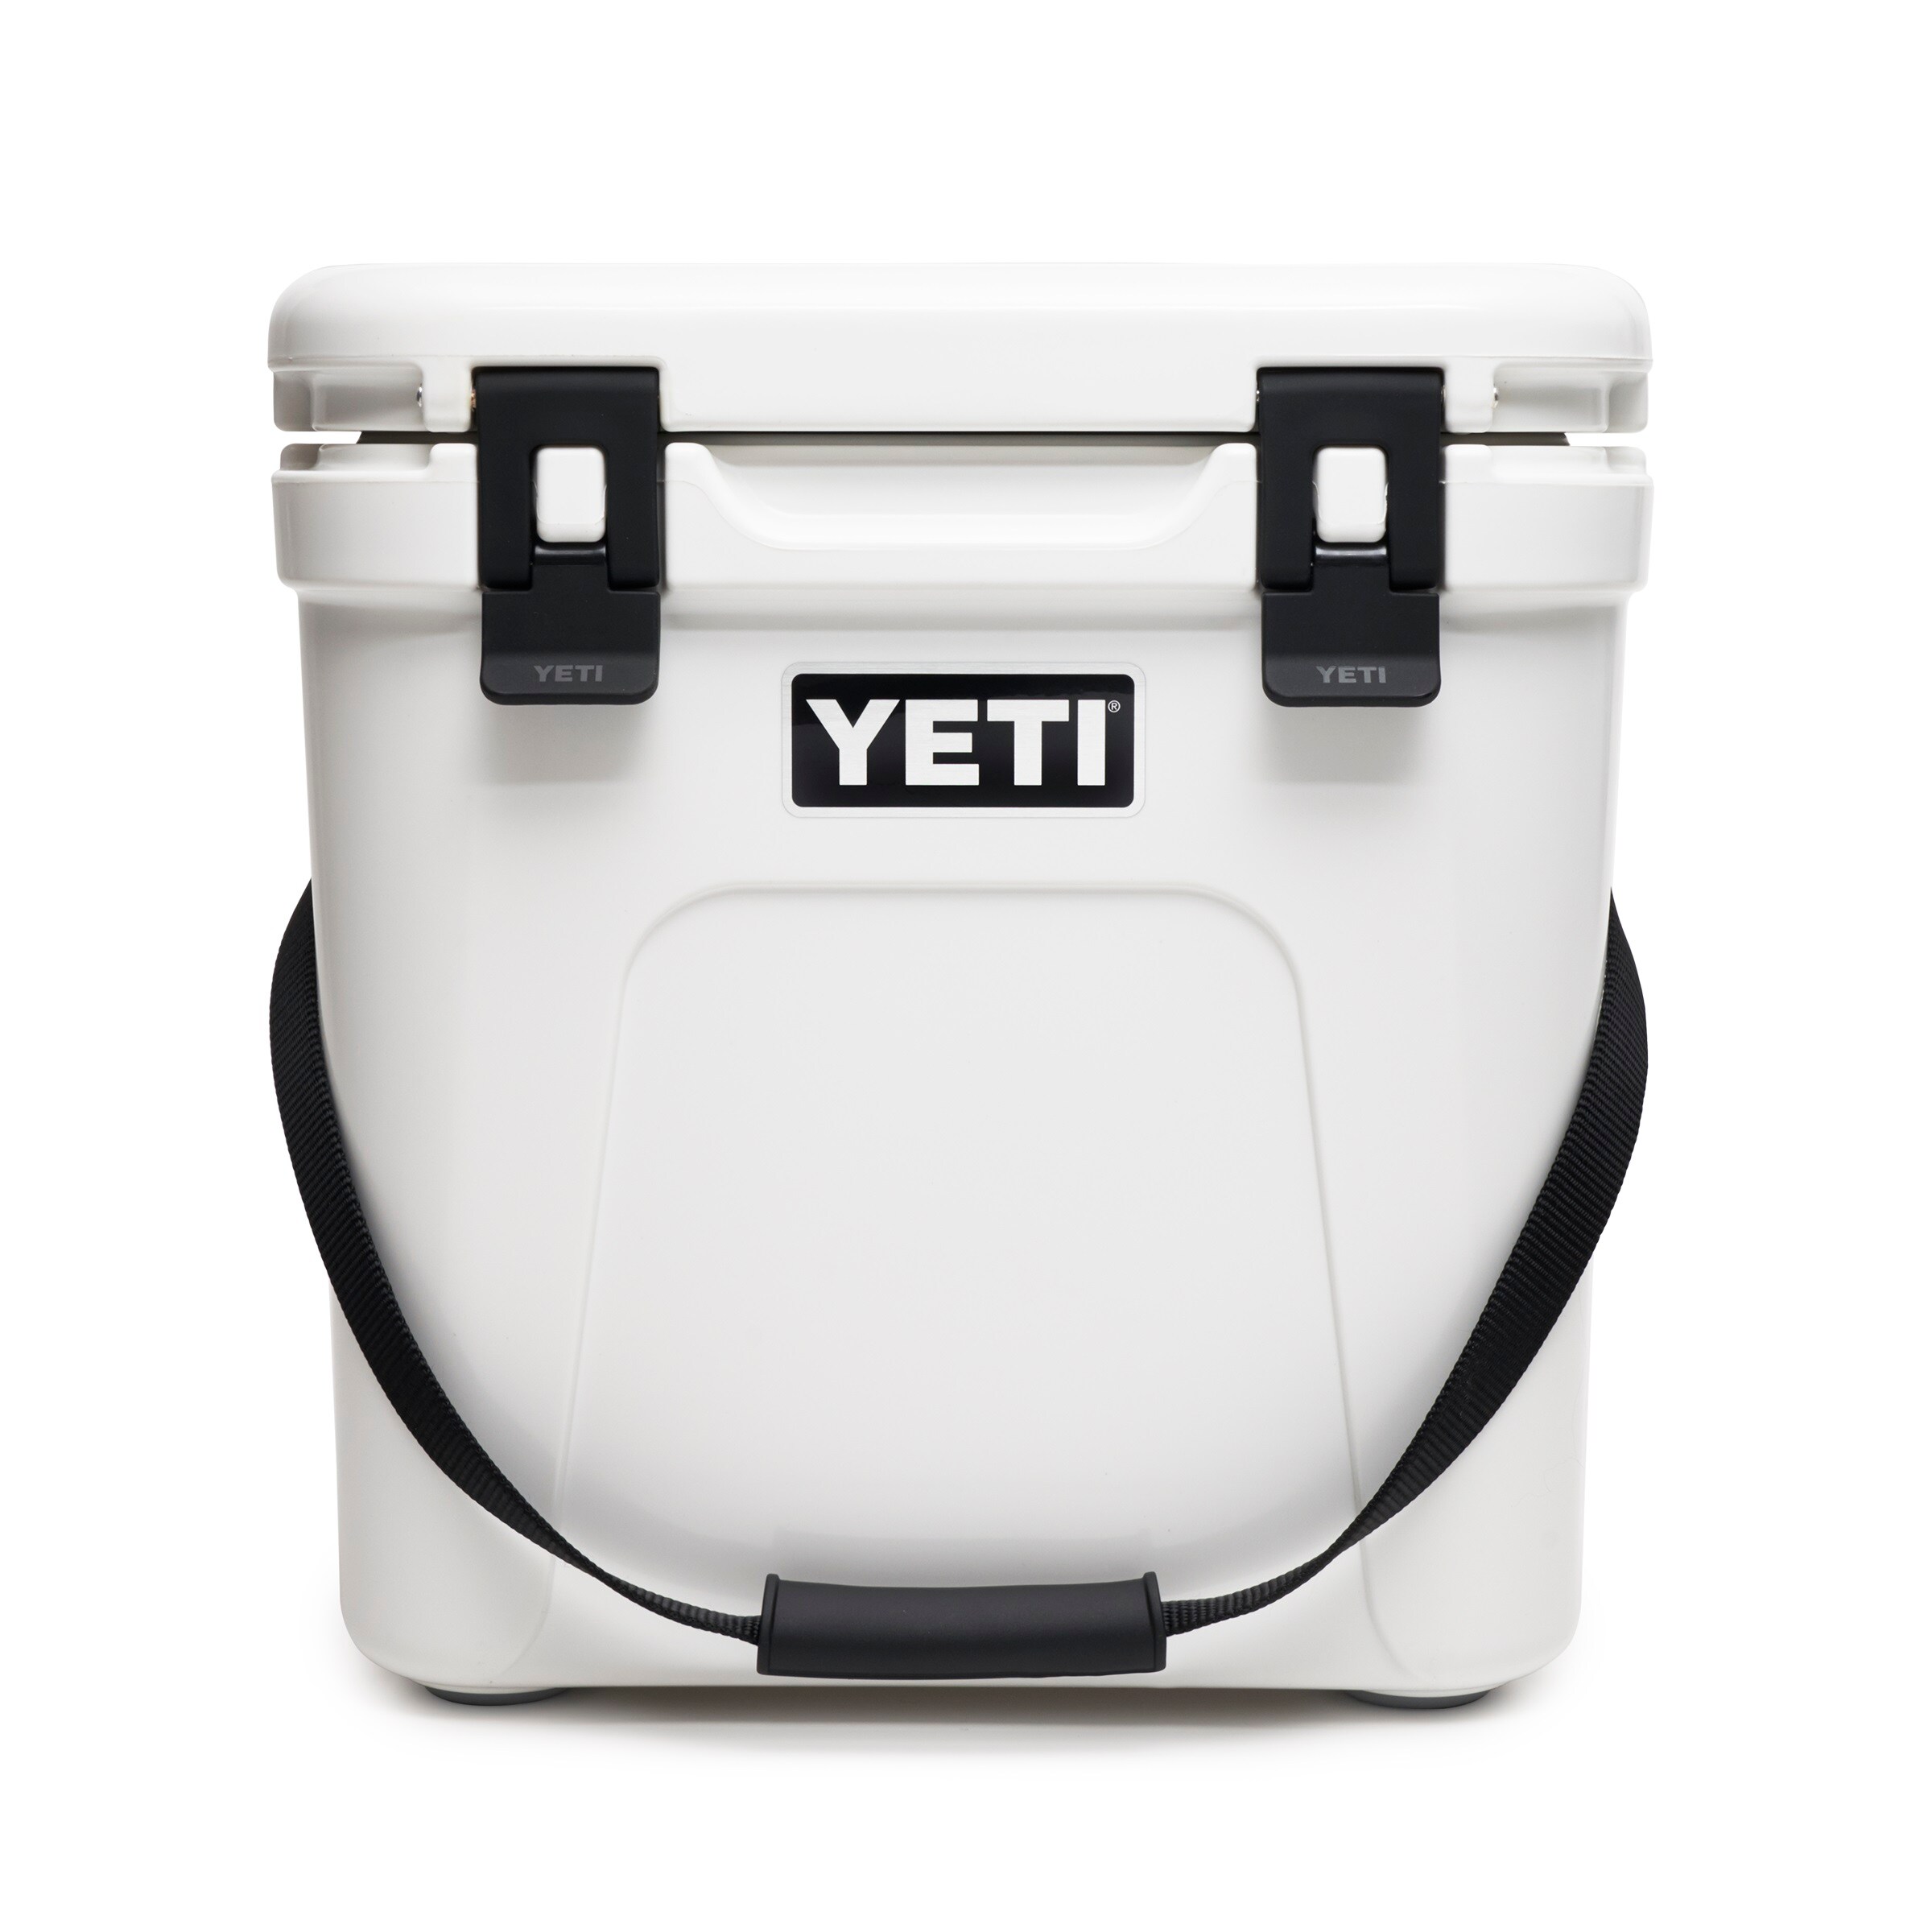 NEW! YETI Roadie 24 Canopy Green Cooler Review How Big is the inside 